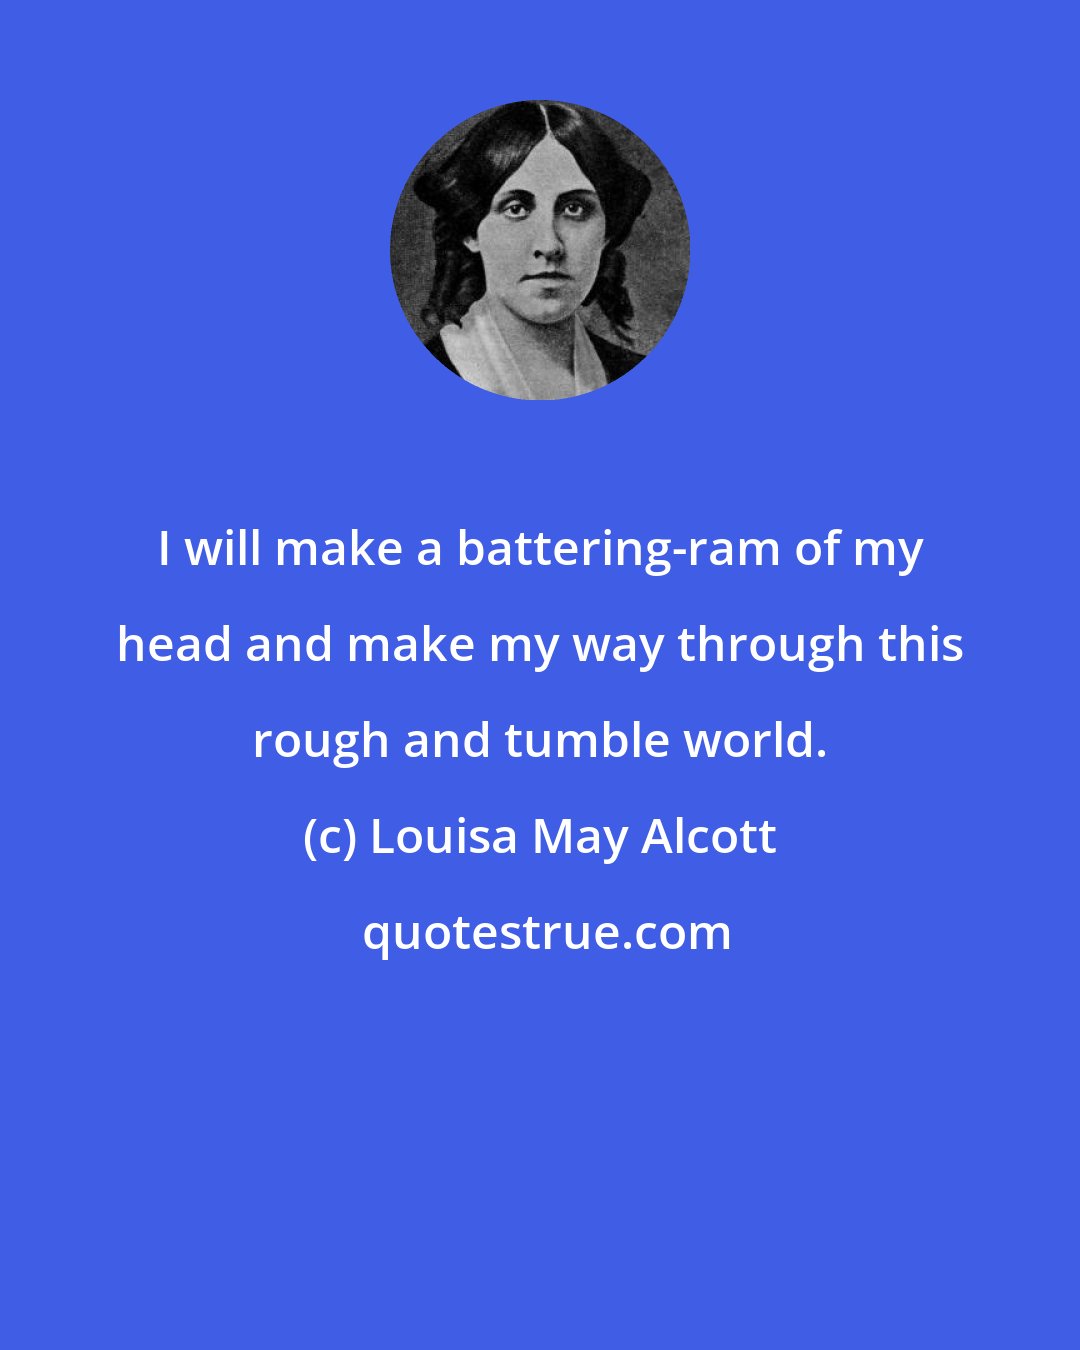 Louisa May Alcott: I will make a battering-ram of my head and make my way through this rough and tumble world.